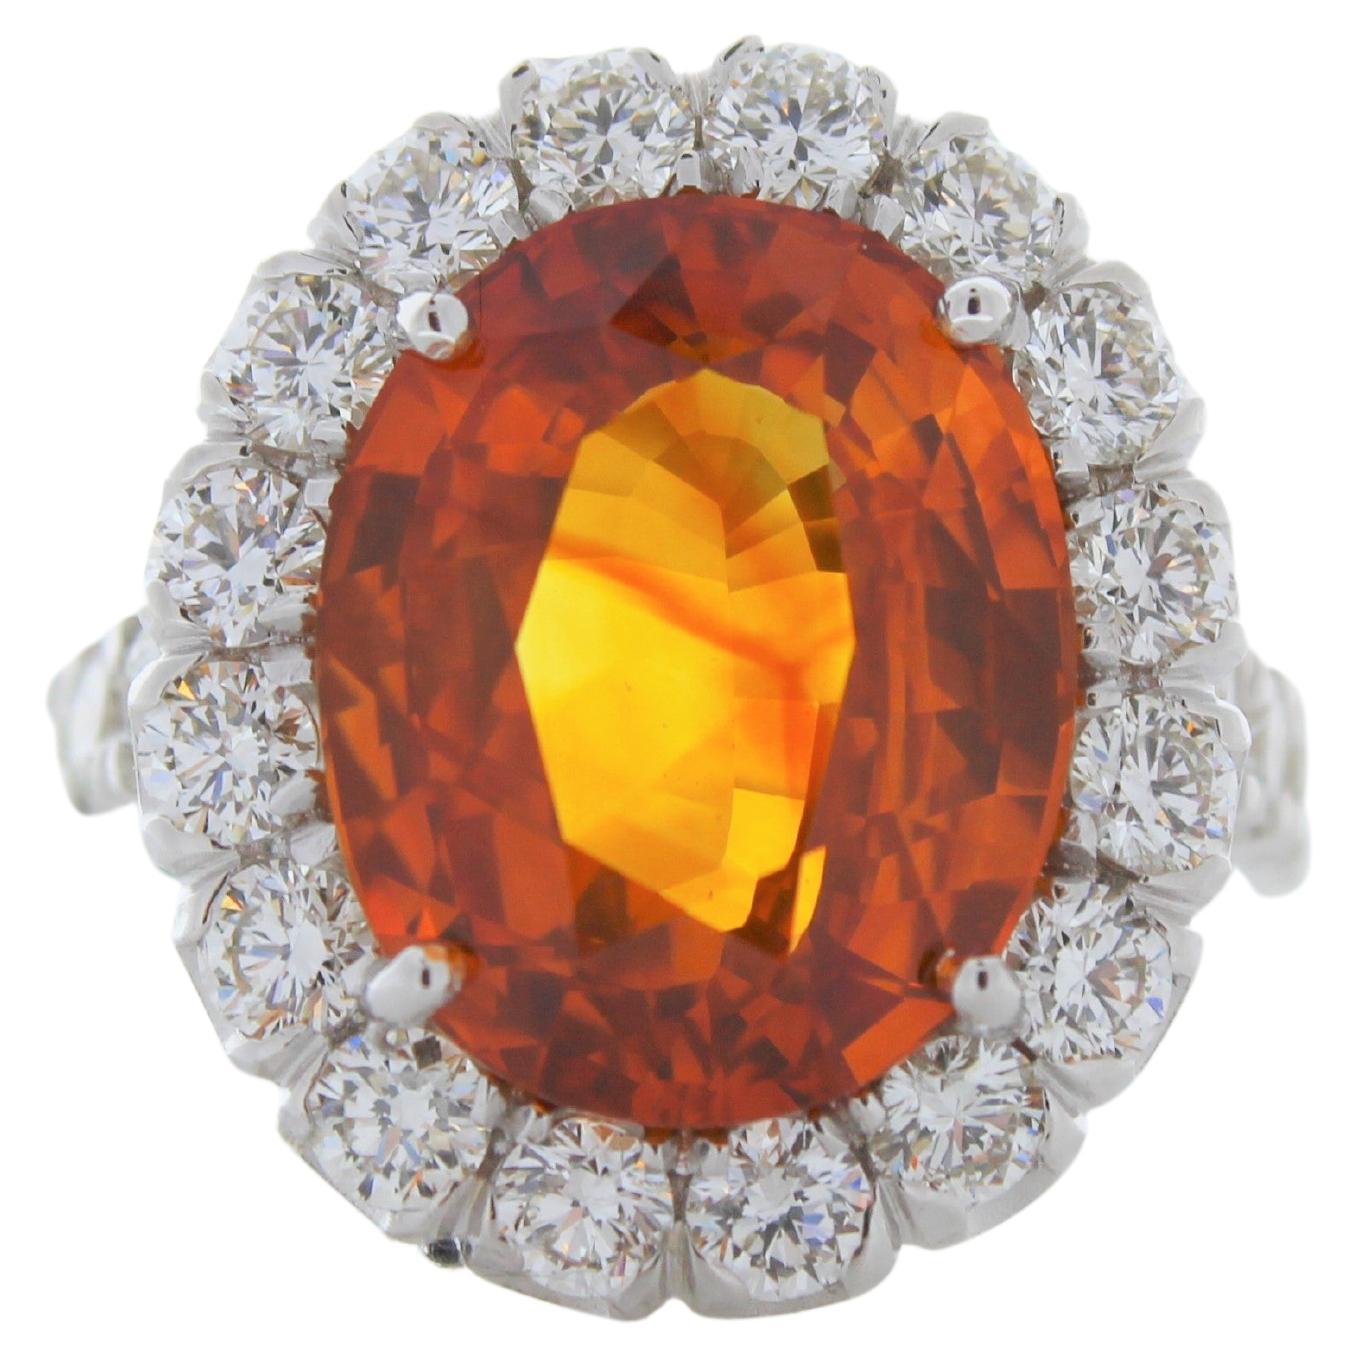 10.47 Carat Oval Orange Sapphire and Diamond Ring in 18K White Gold For Sale